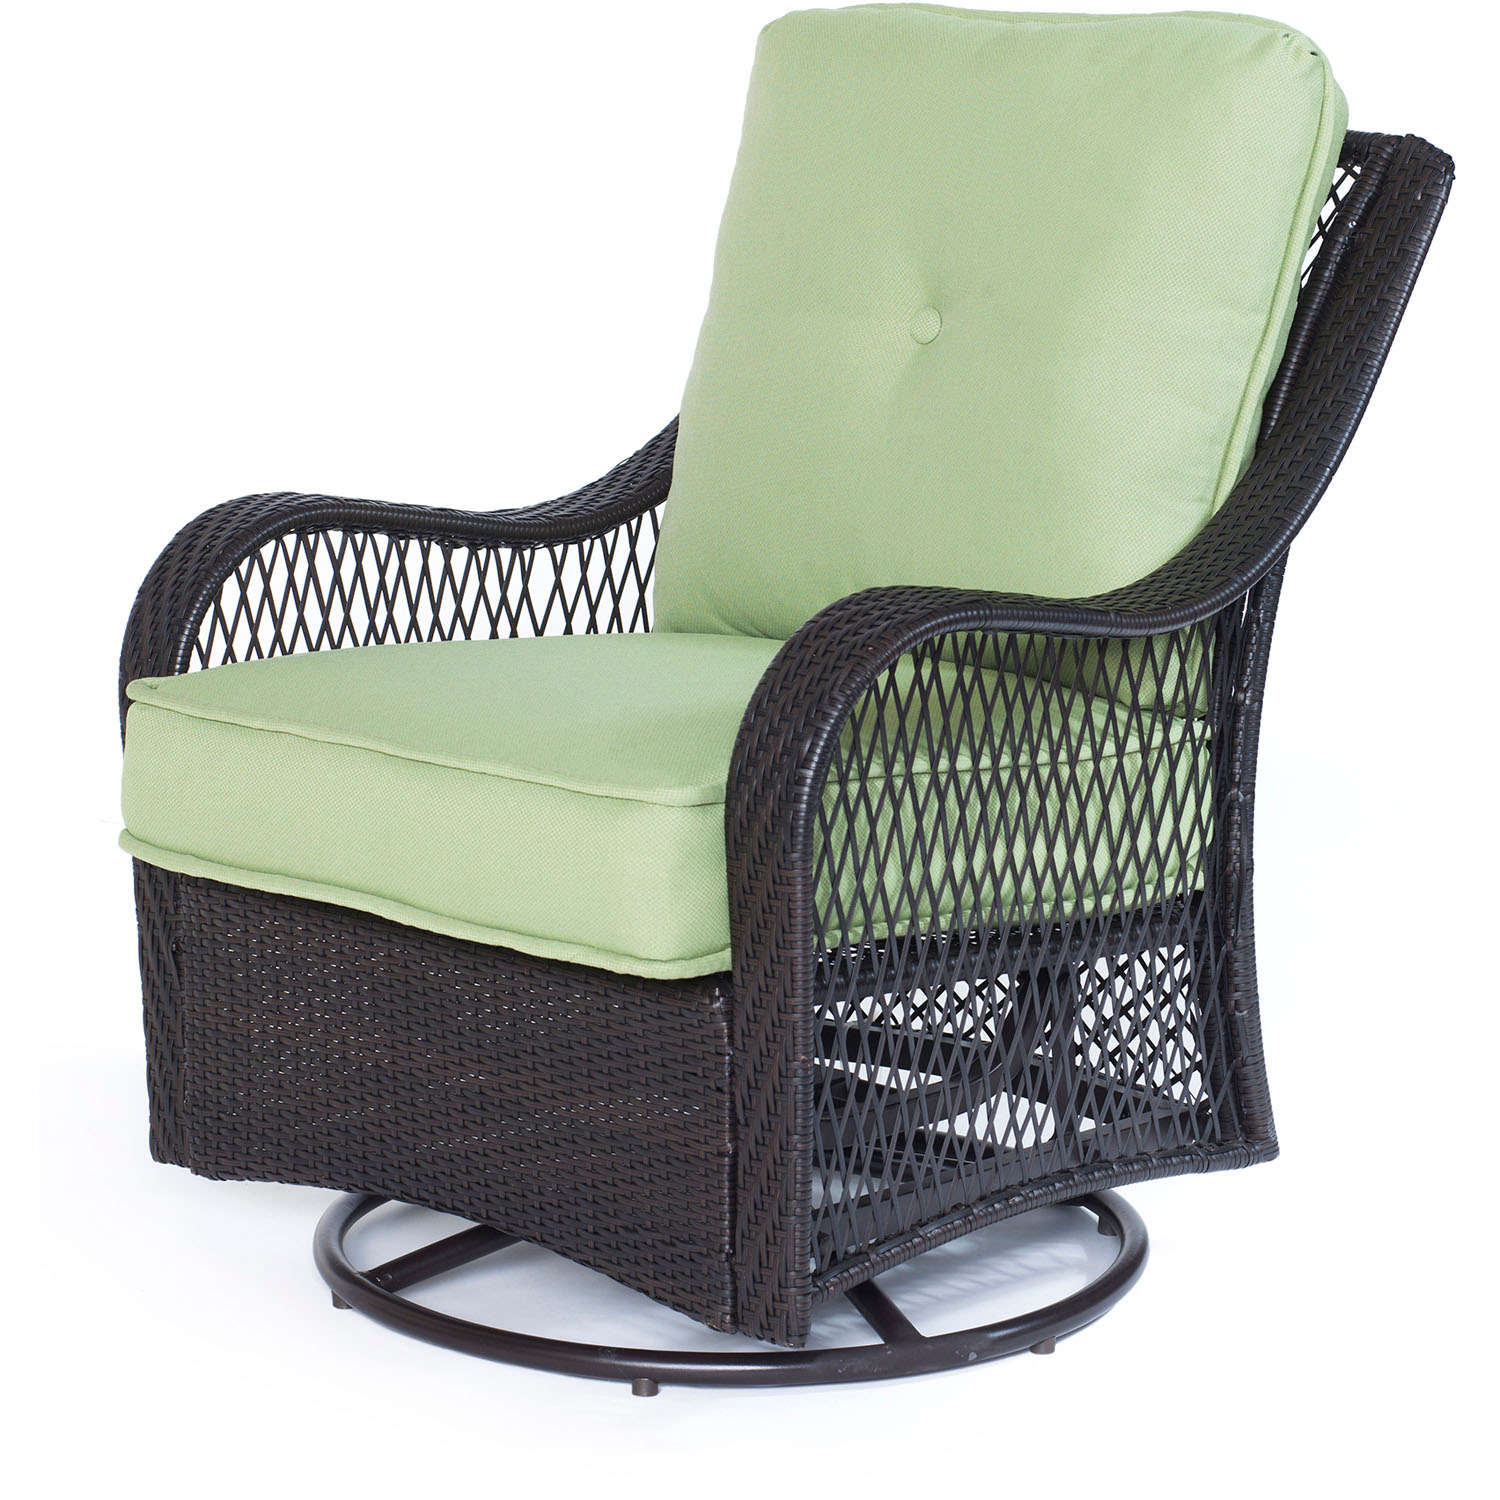 Hanover Orleans 5 Pcs Wicker and Steel Propane Fire Pit Chat Set, Avocado Green - image 2 of 9